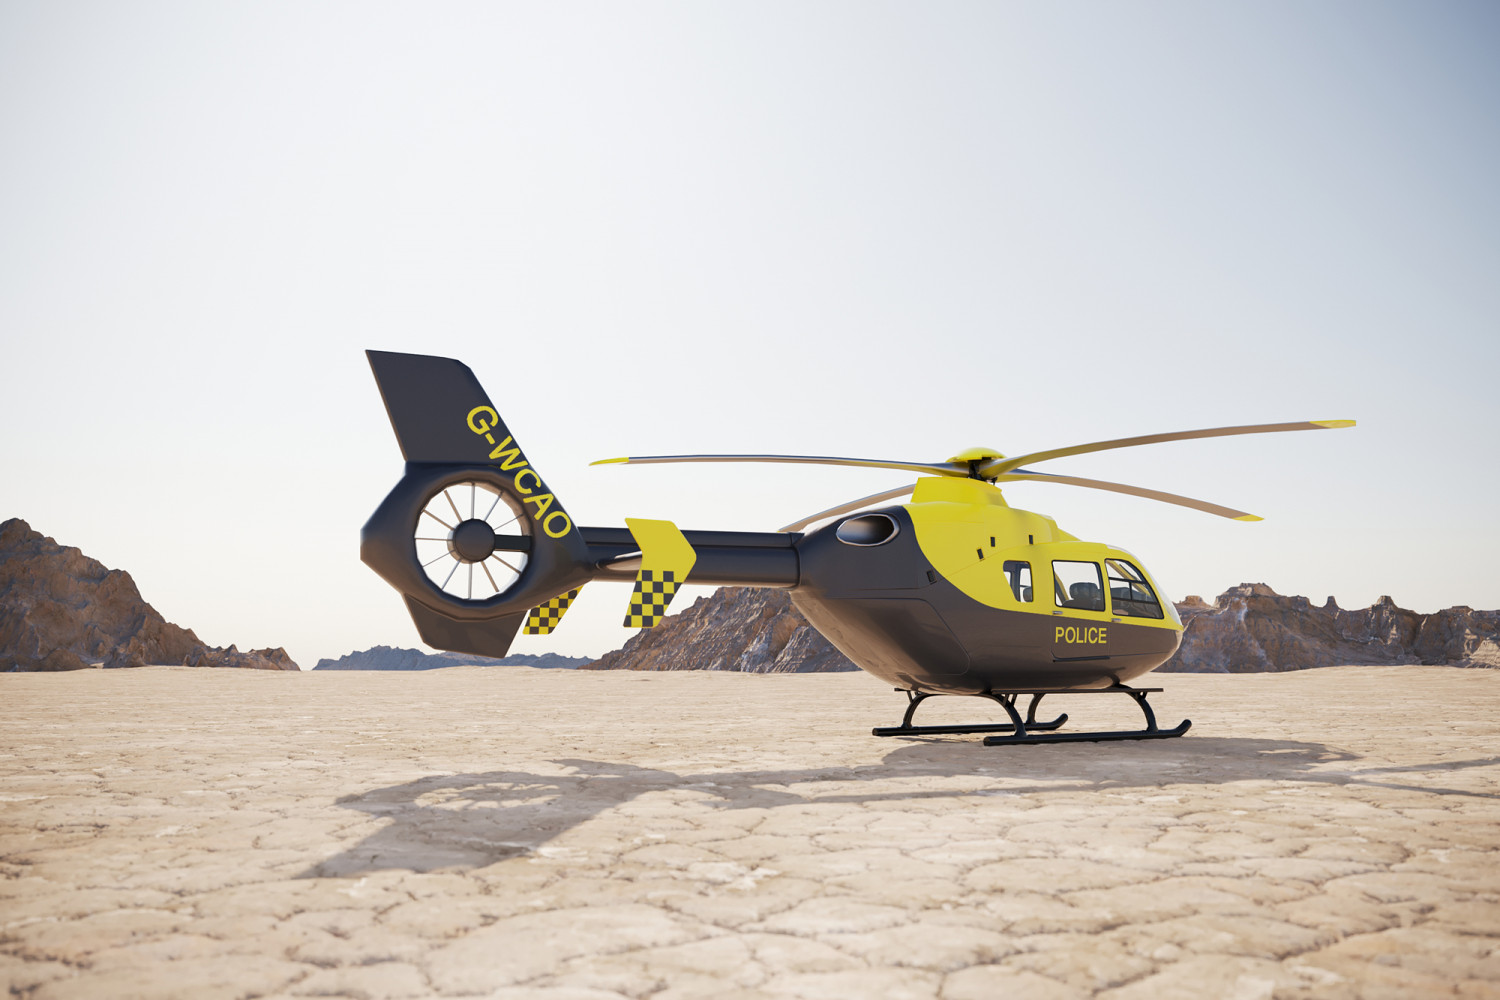 Mid size passenger helicopter